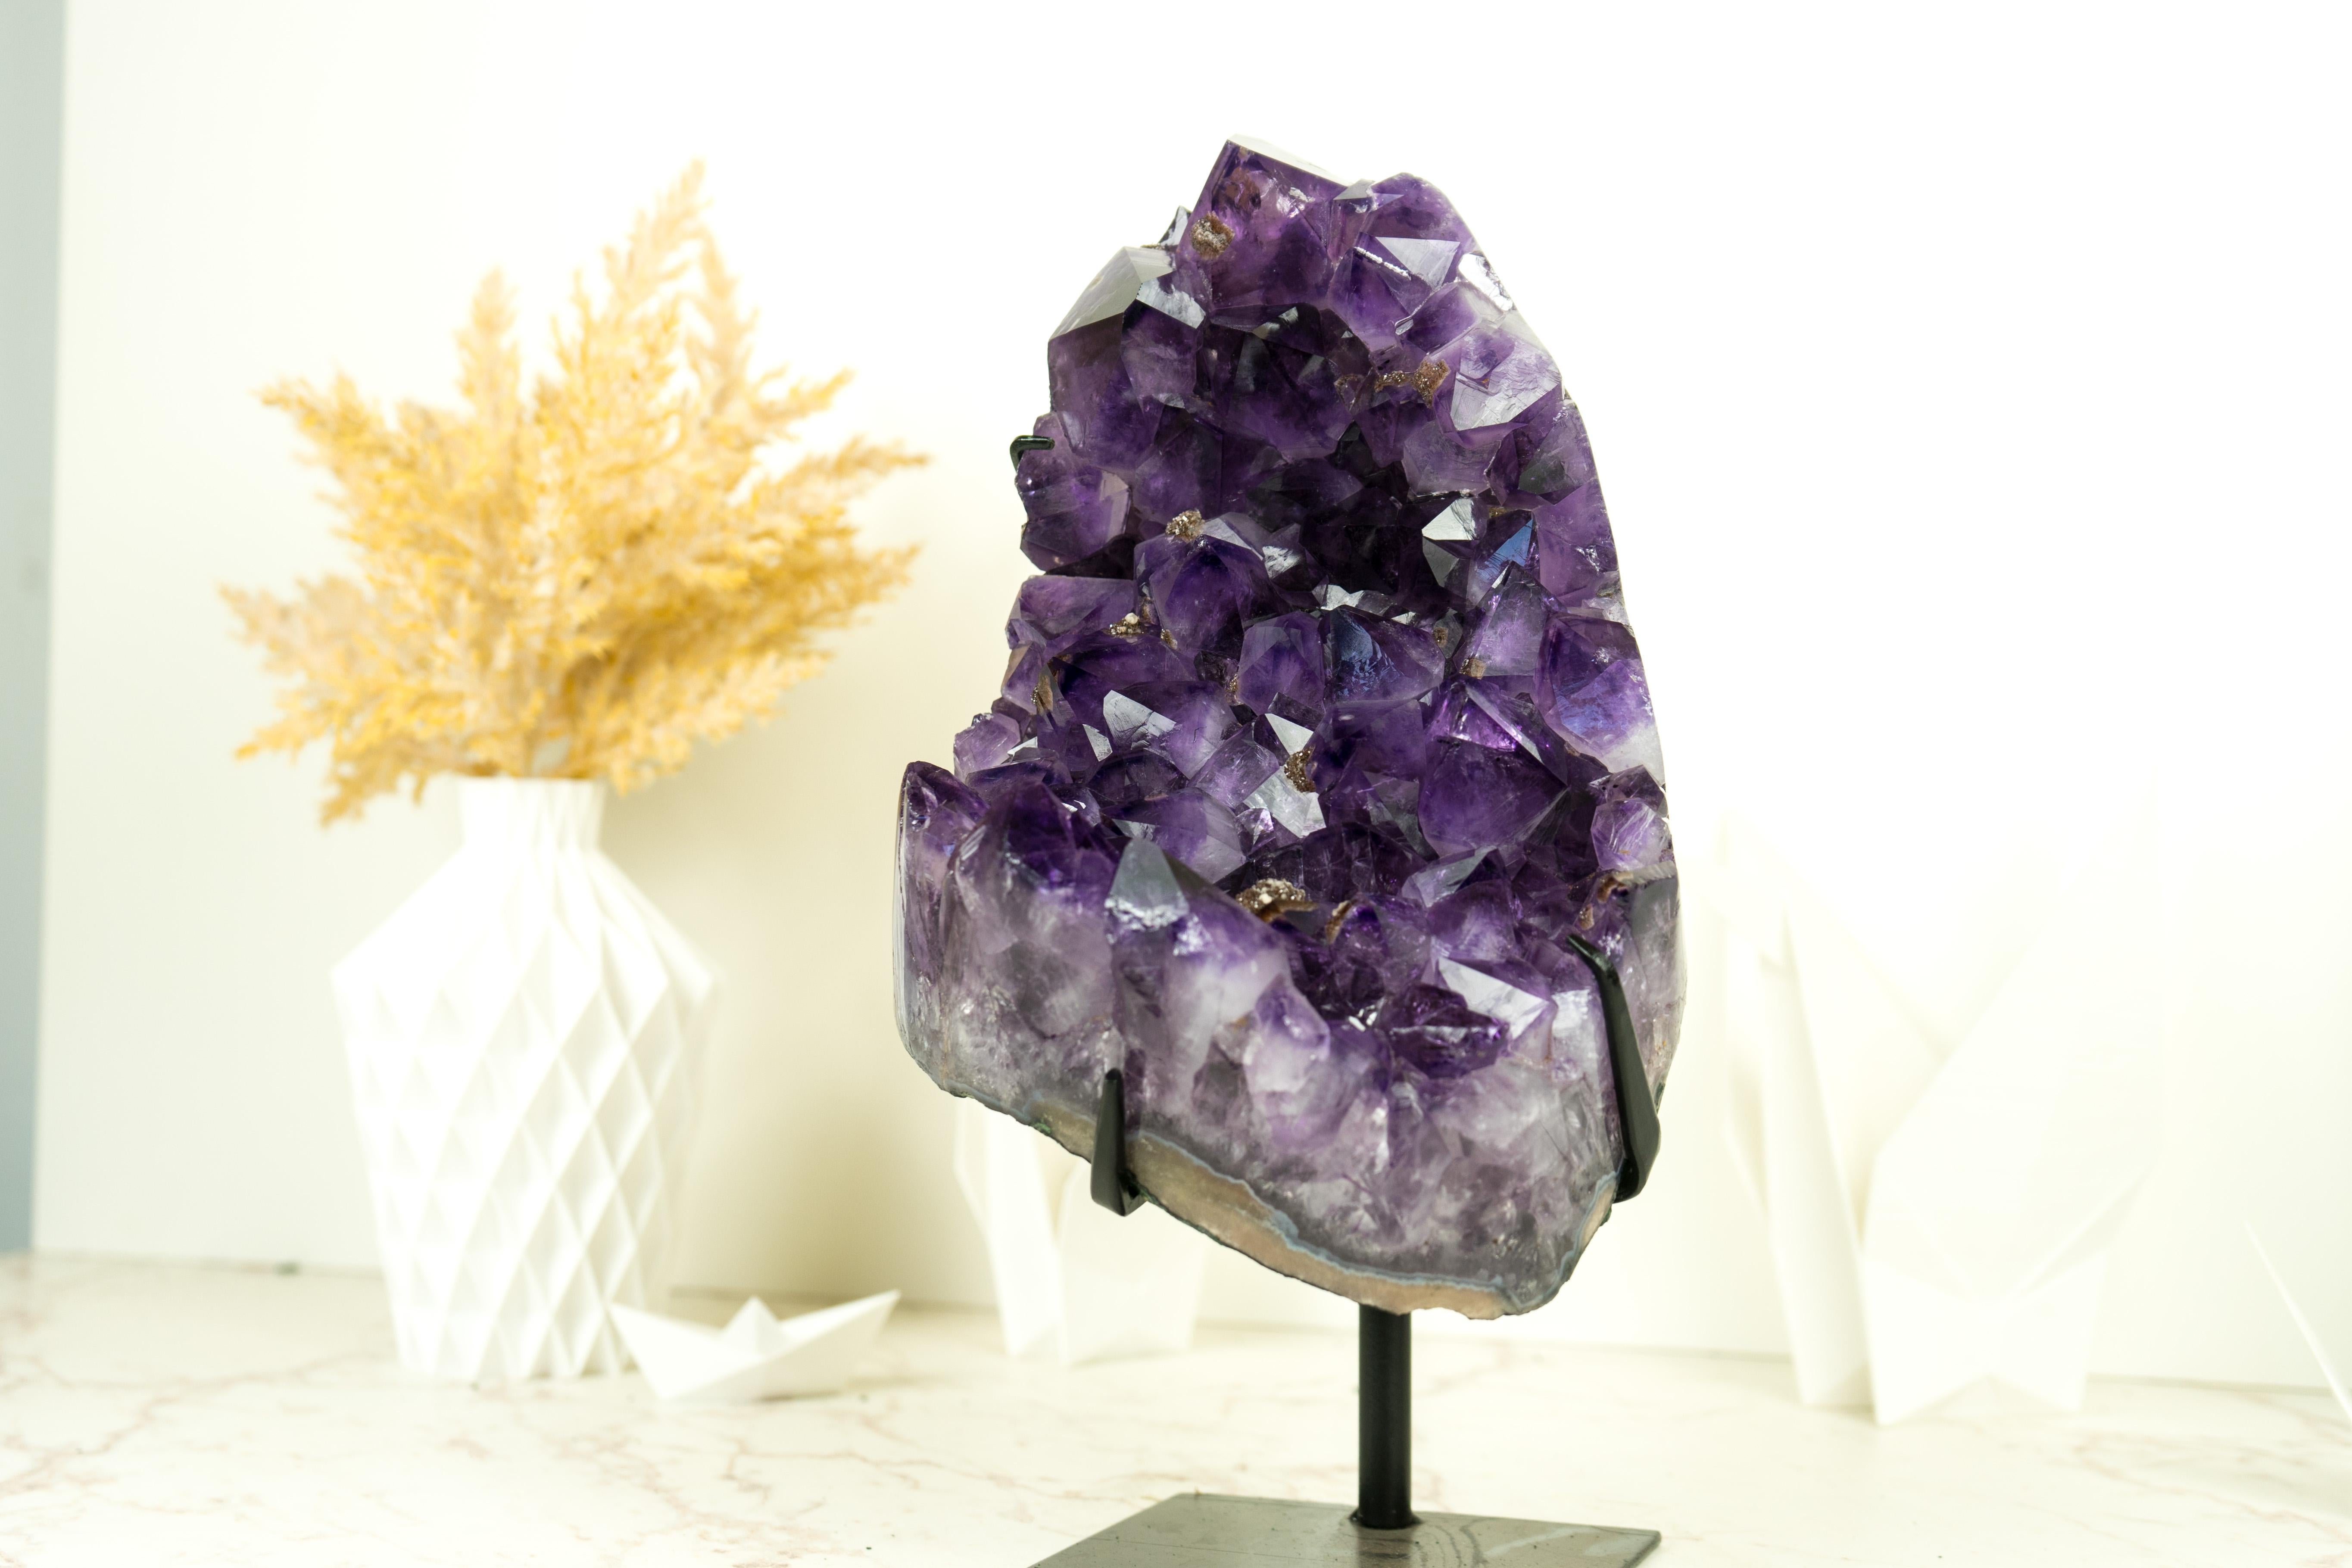 With an intense shade of purple, as if violet meets black, on large Amethyst points, this cluster showcases the best quality an Amethyst can have. Set on a made-to-order stand, this specimen will be the centerpiece of your decor or